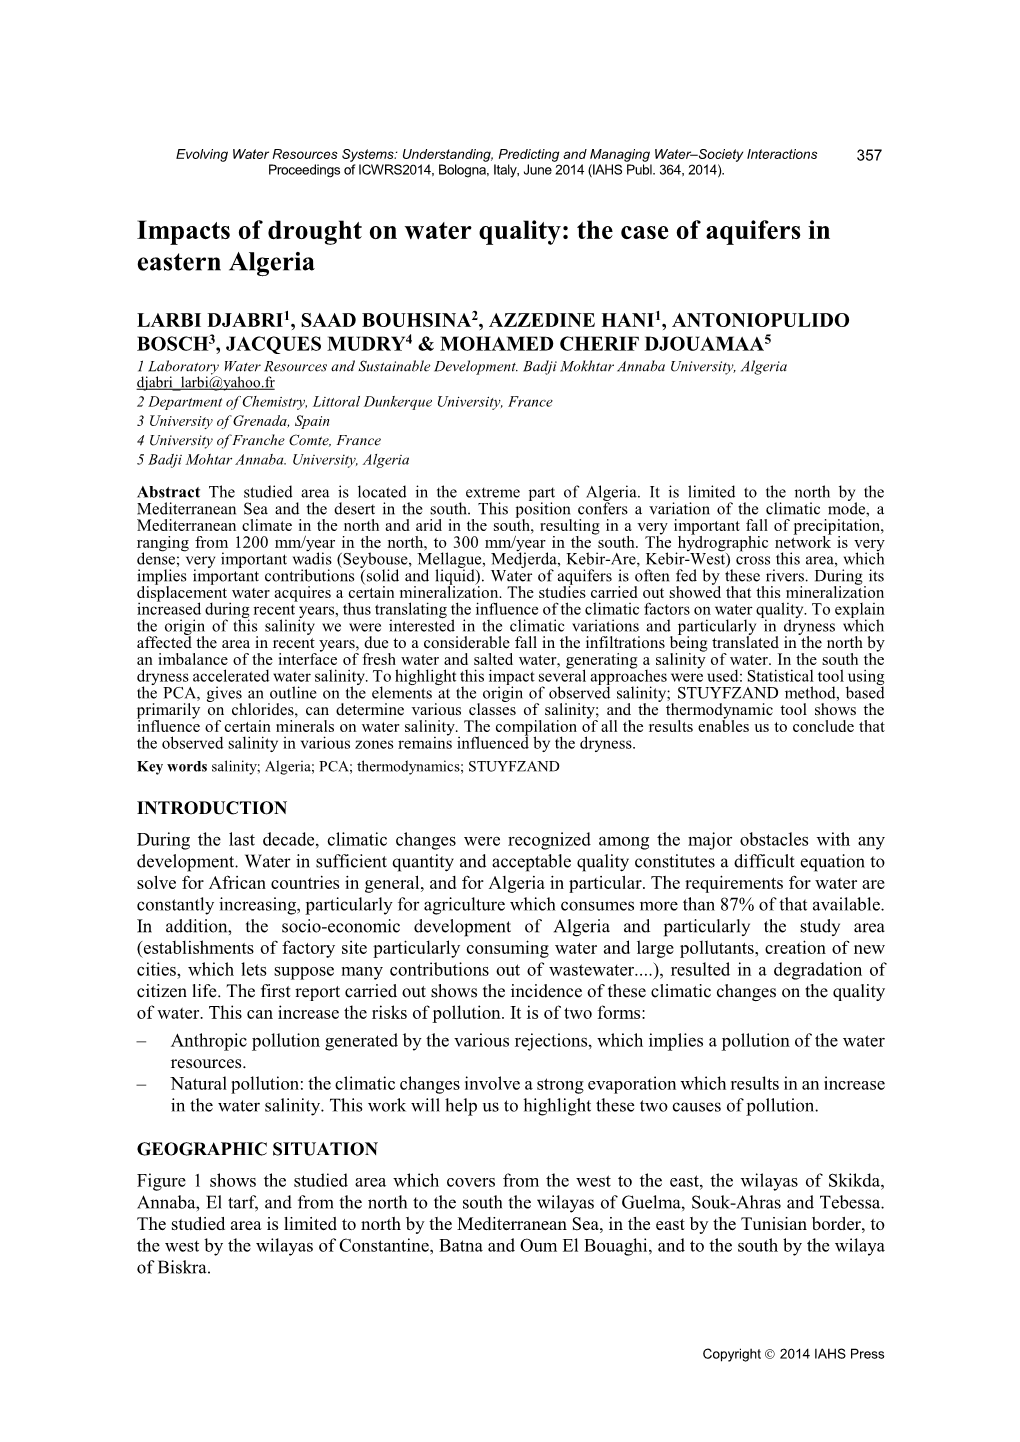 Impacts of Drought on Water Quality: the Case of Aquifers in Eastern Algeria